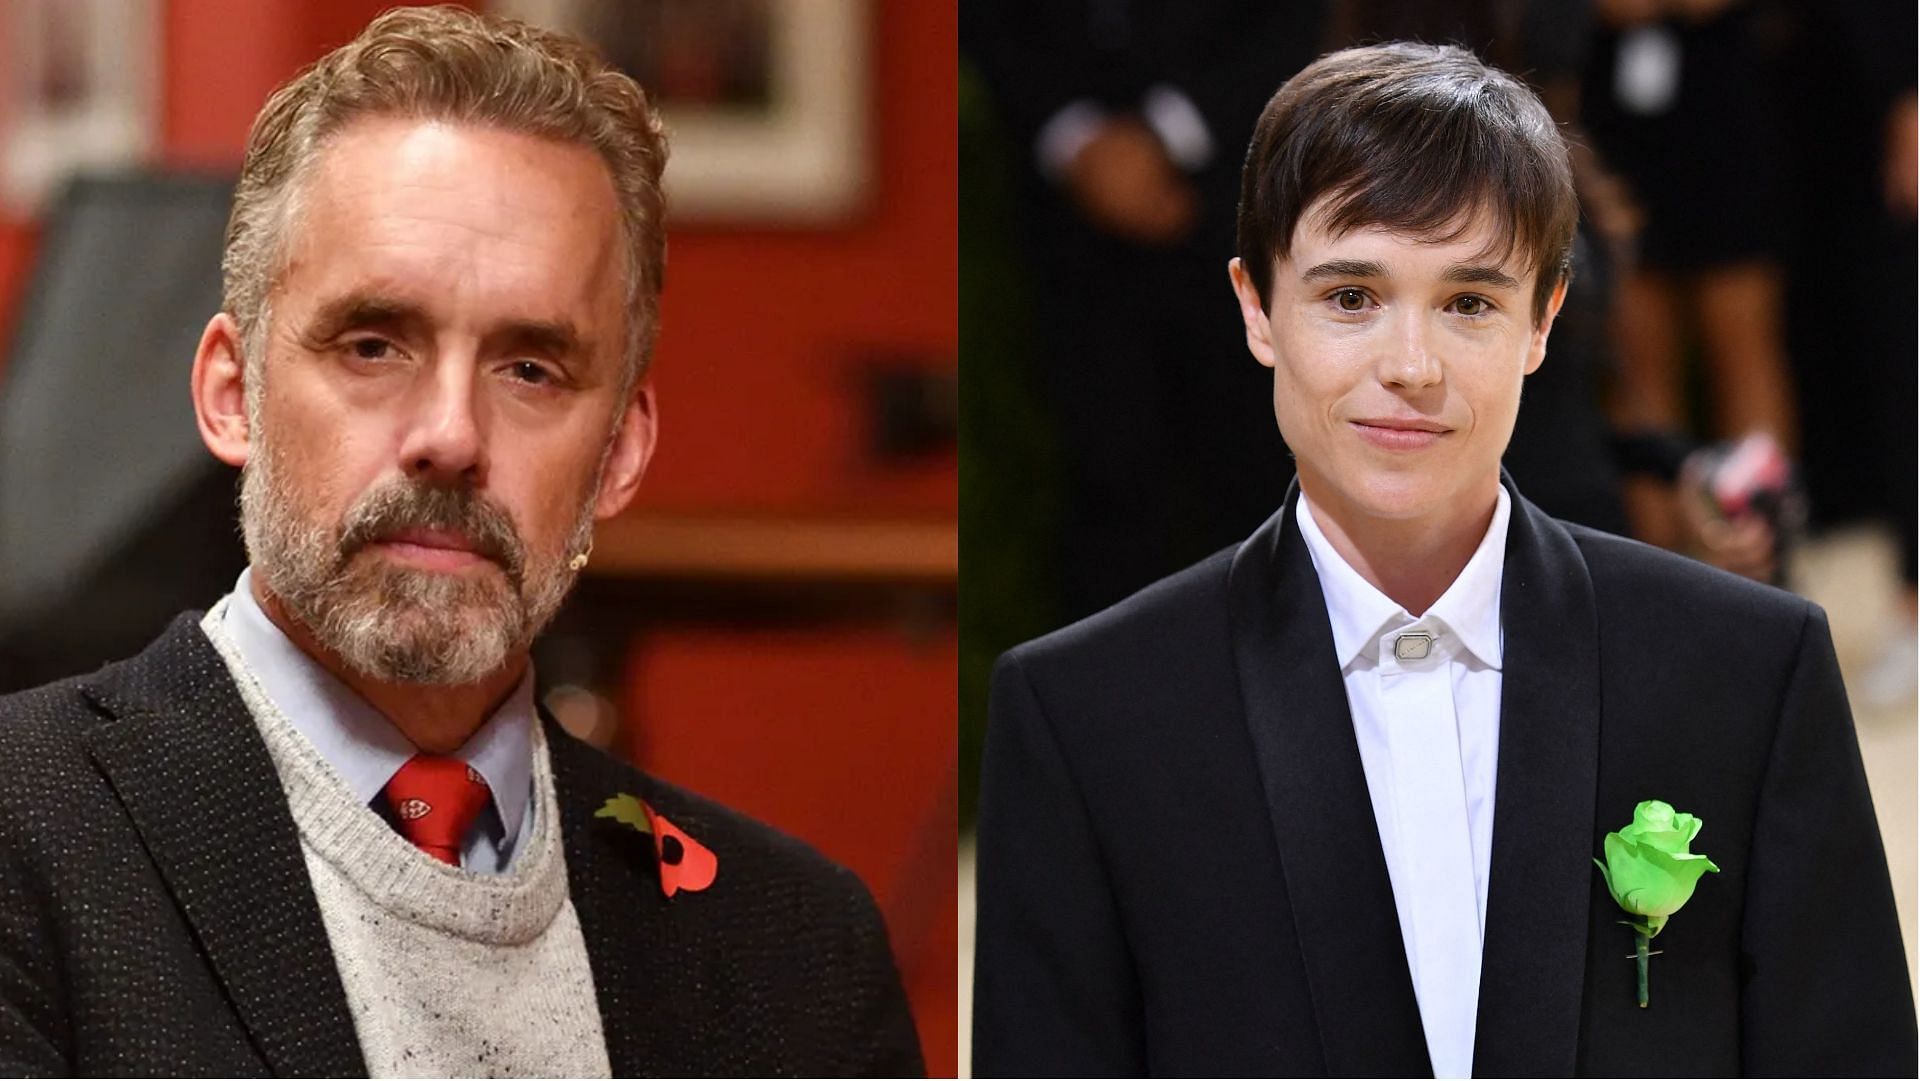 Jordan Peterson made some problematic comments on transgender actor Elliot Page. (Image via Getty Images/Chris Williamson/Angela Weiss)